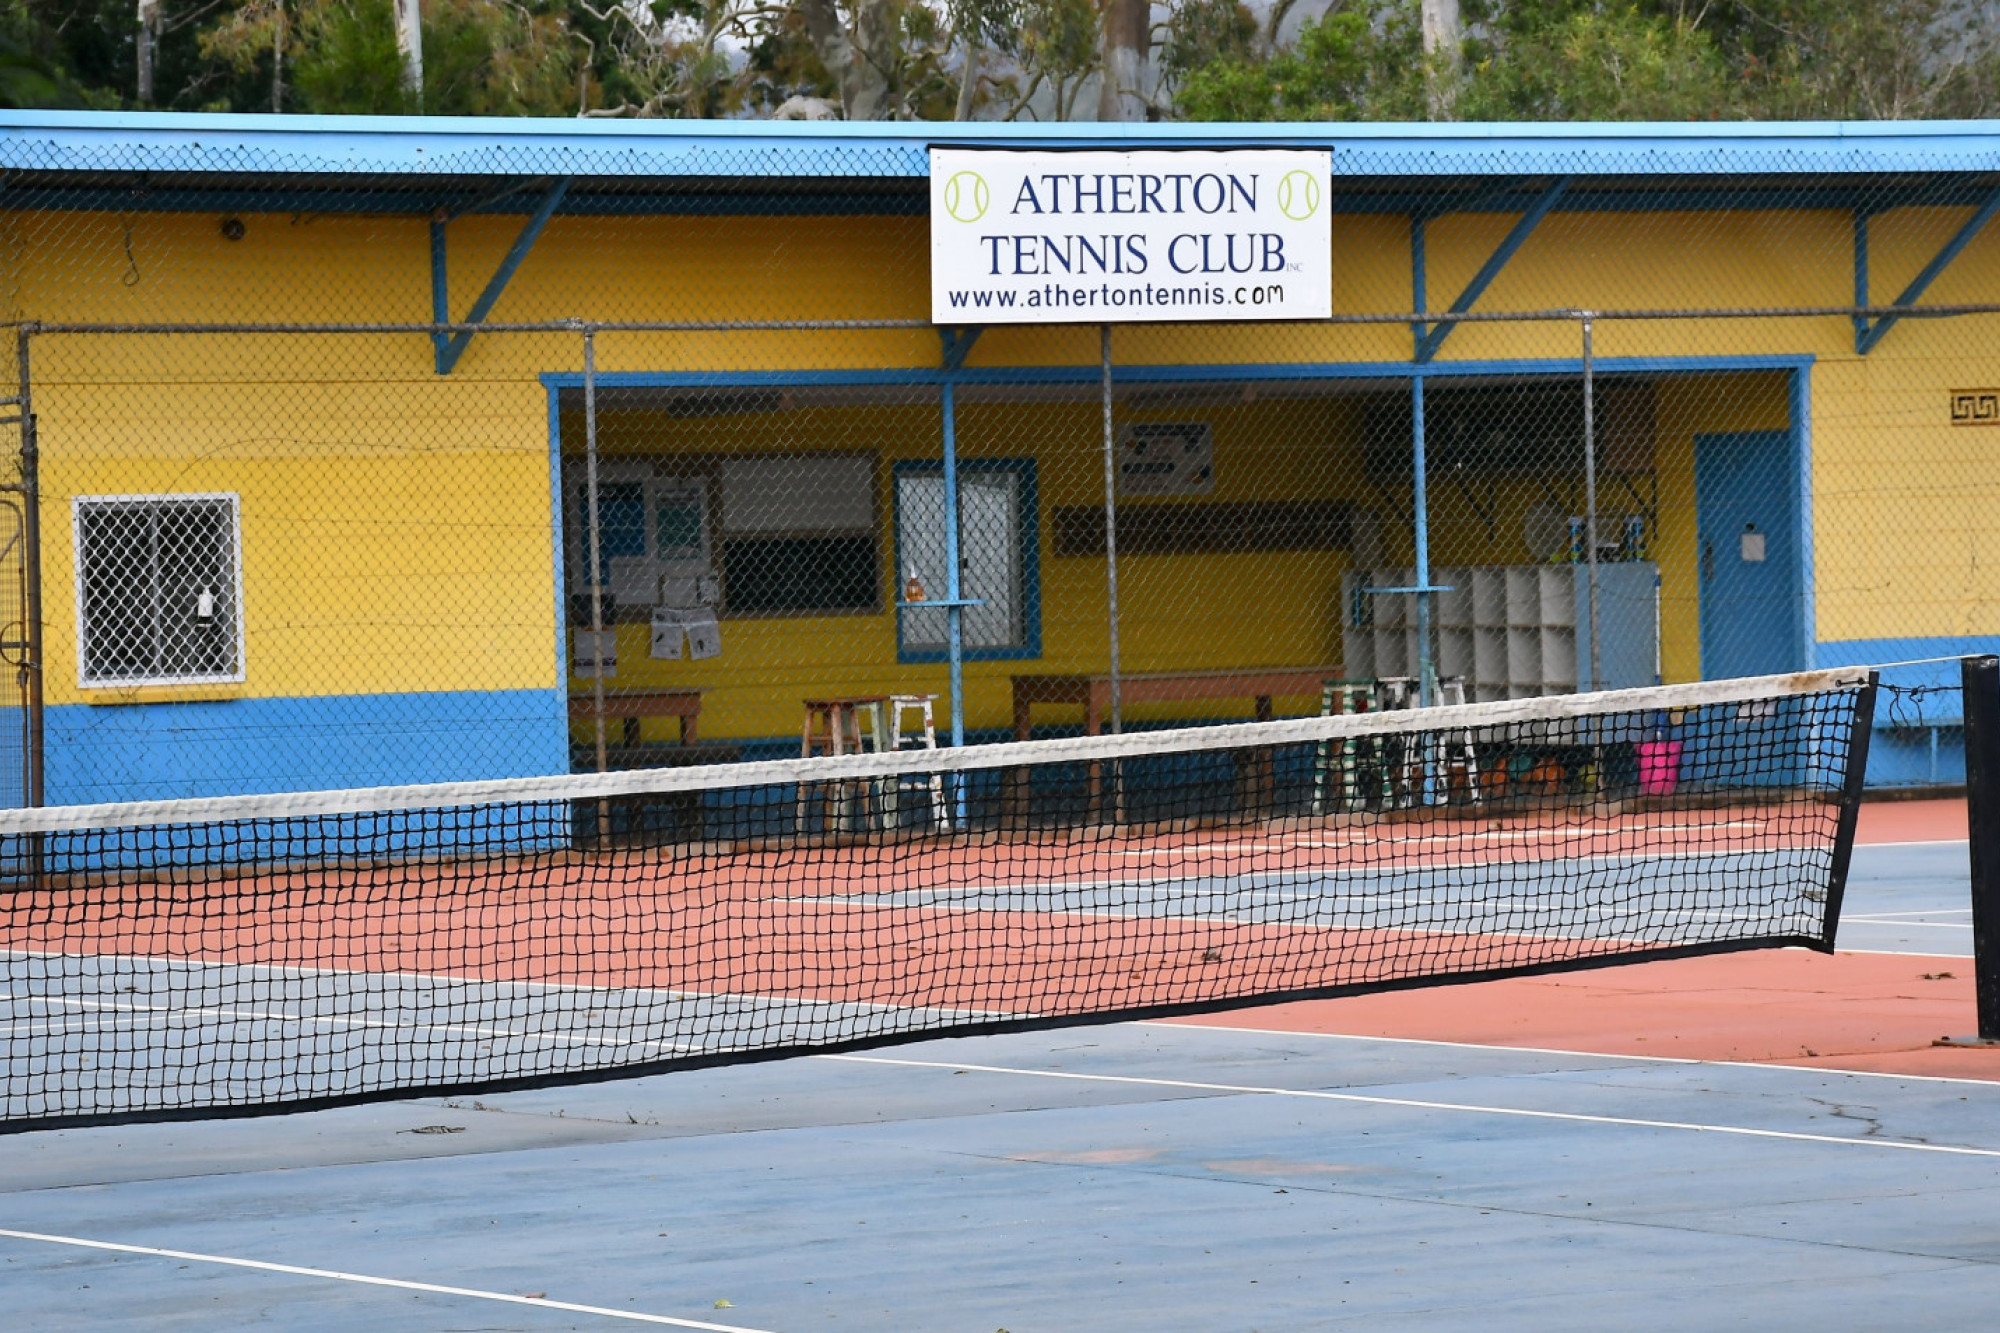 The Atherton Tennis Club has been left without lights as the Tablelands Regional Council recently removed all of their court lights